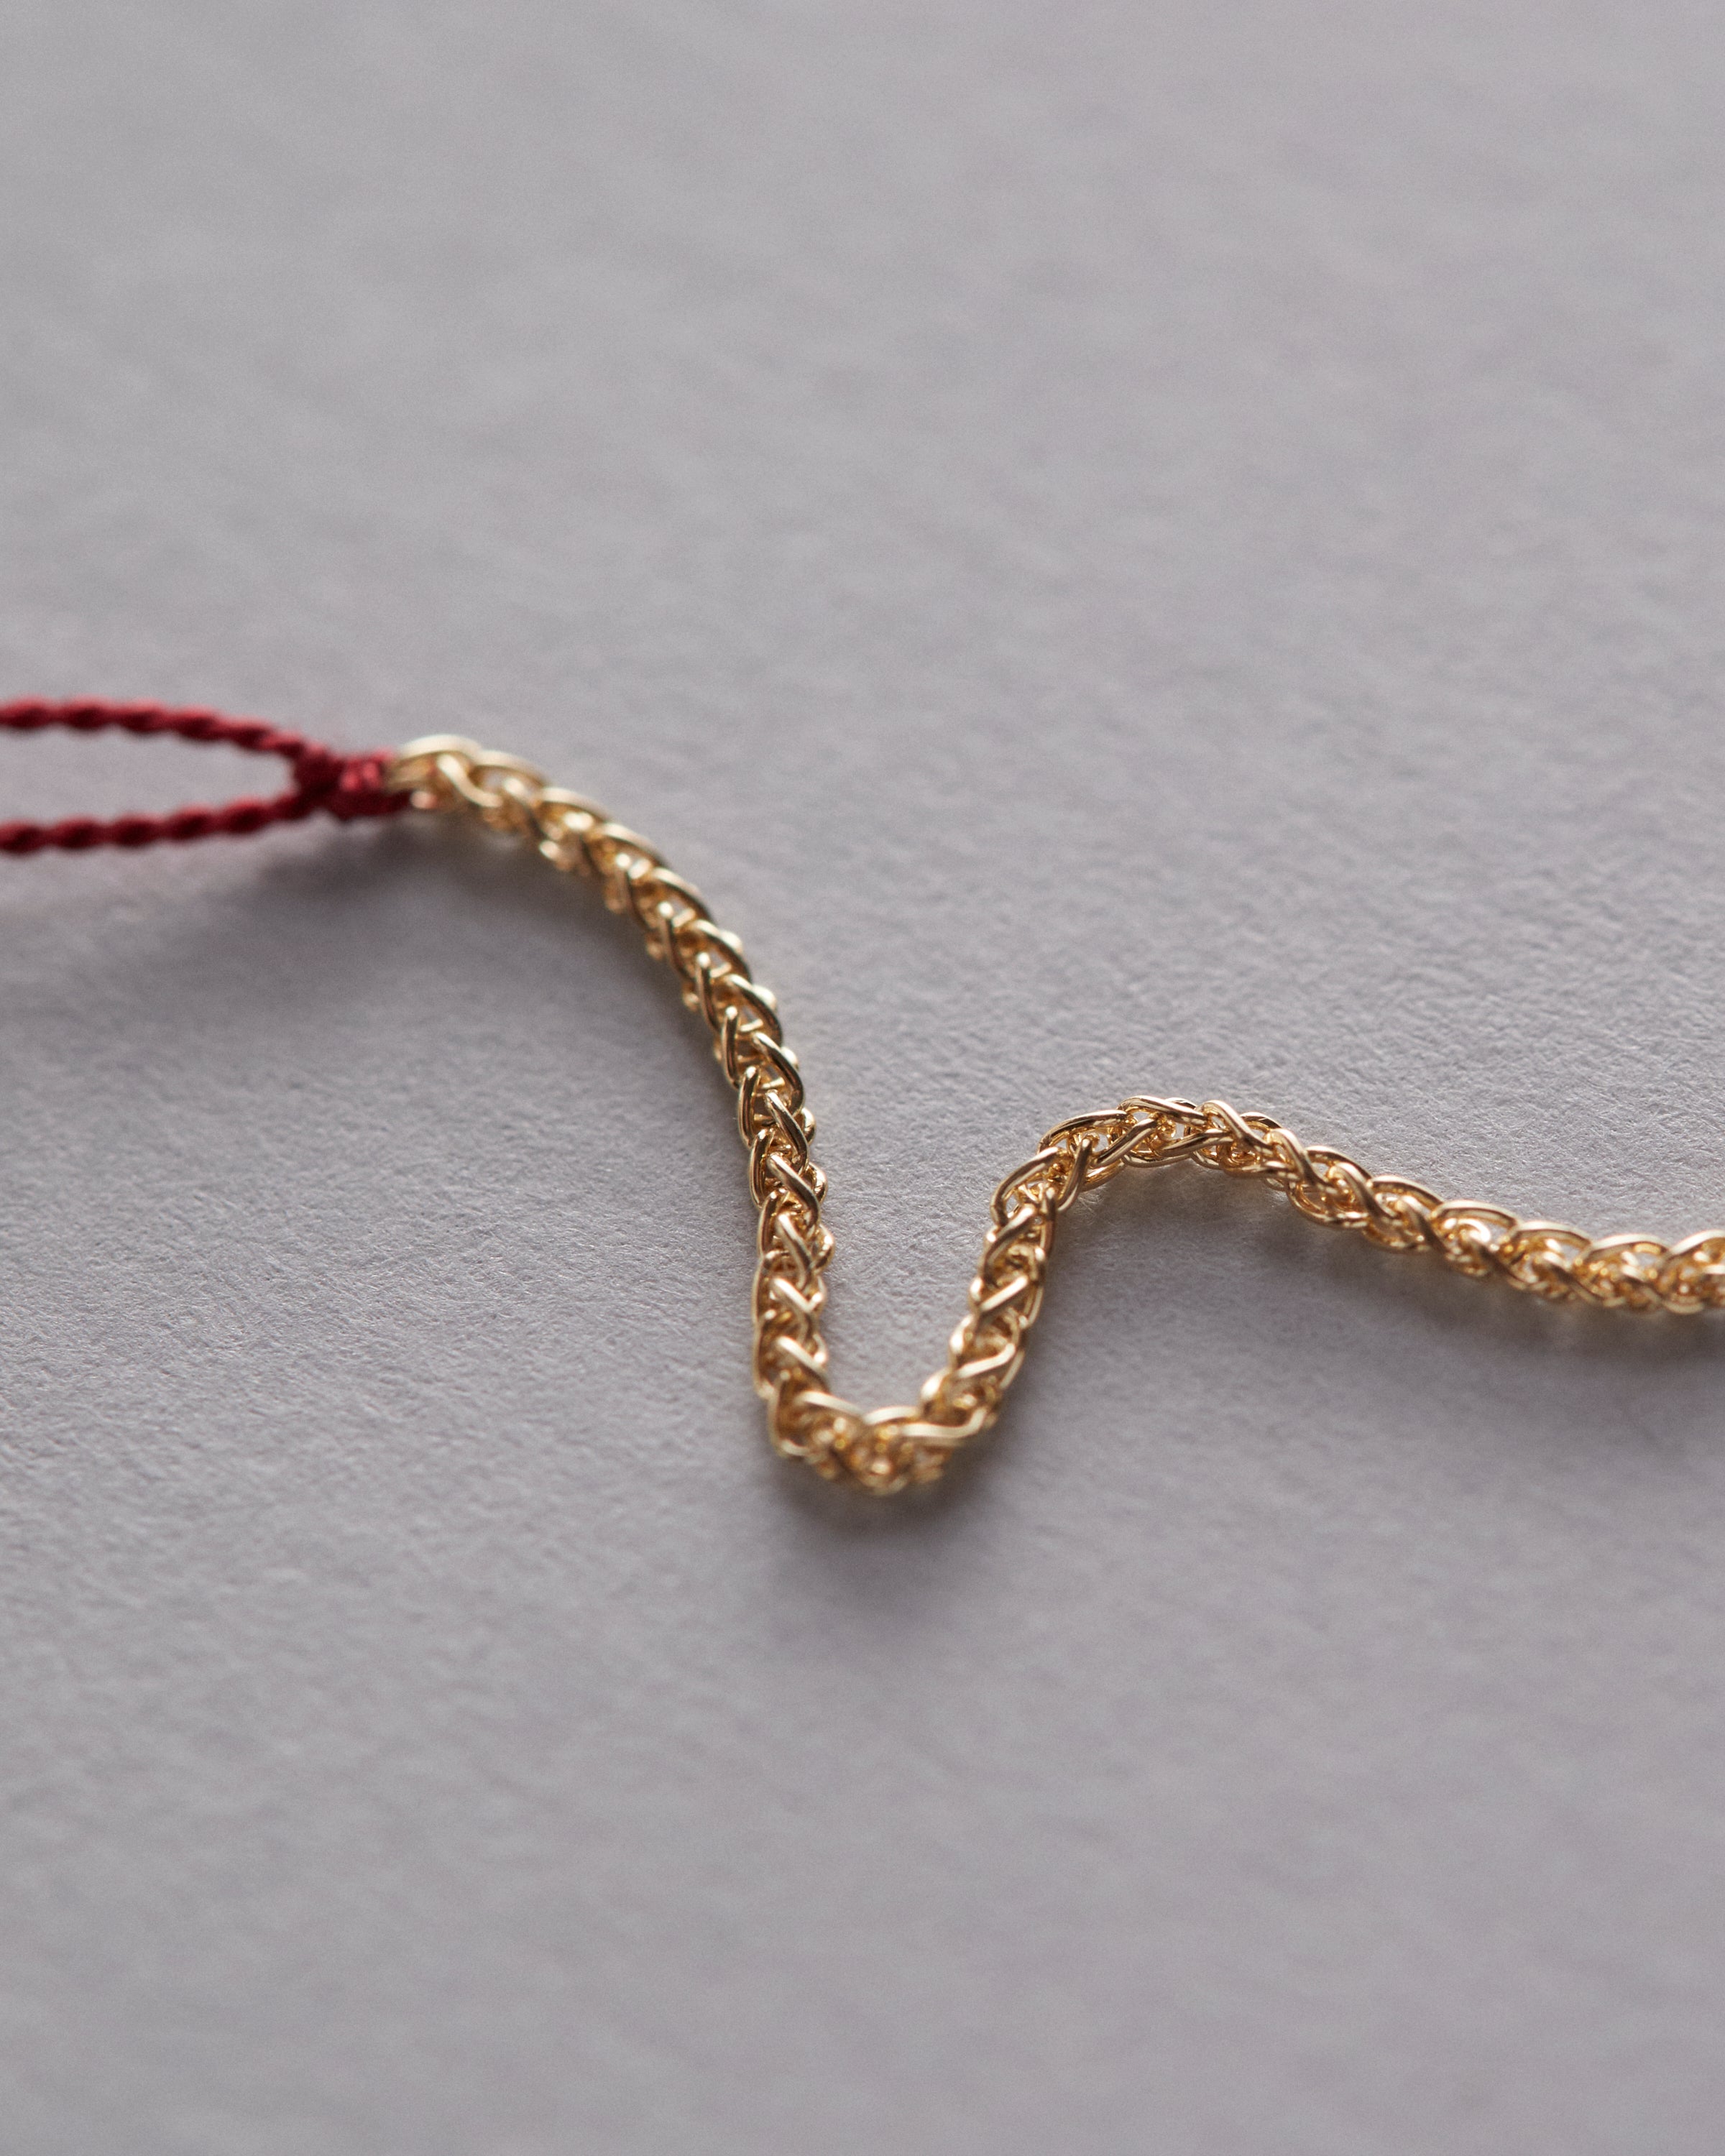 9kt Yellow Gold and Silk Wish Bracelet